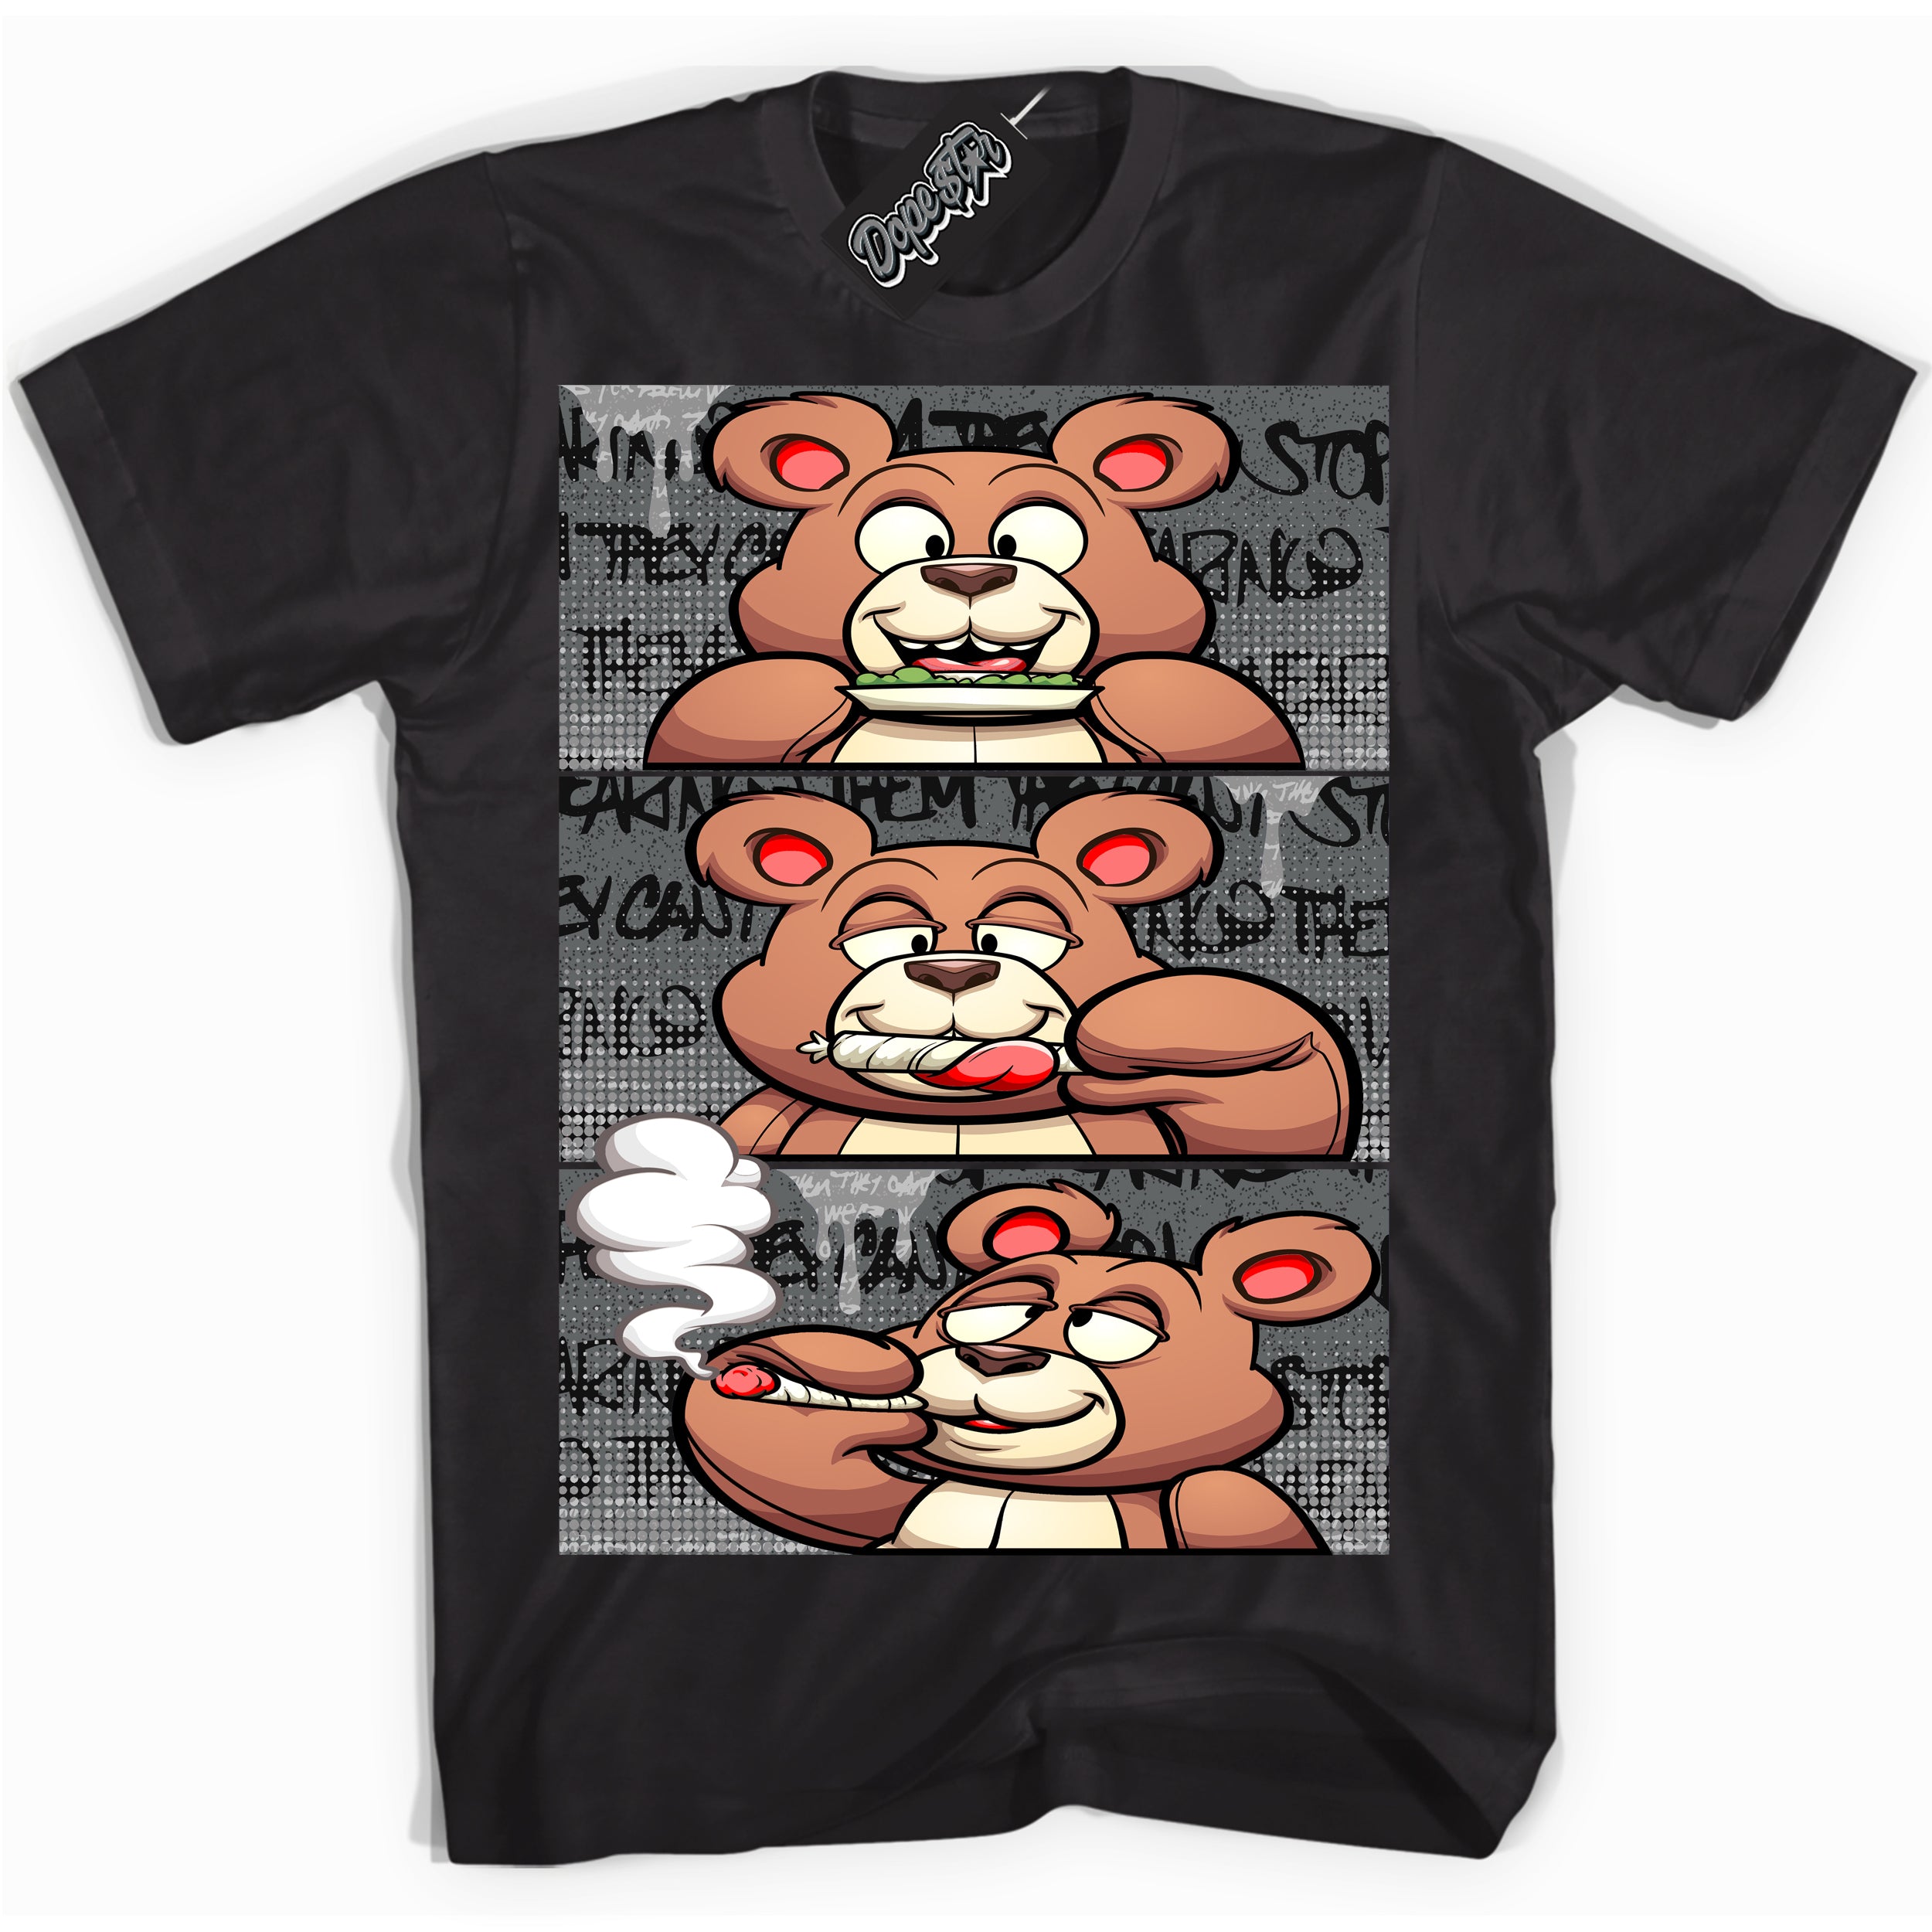 Cool Black Shirt with “ Roll It Lick It Smoke It Bear ” design that perfectly matches Rebellionaire 1s Sneakers.